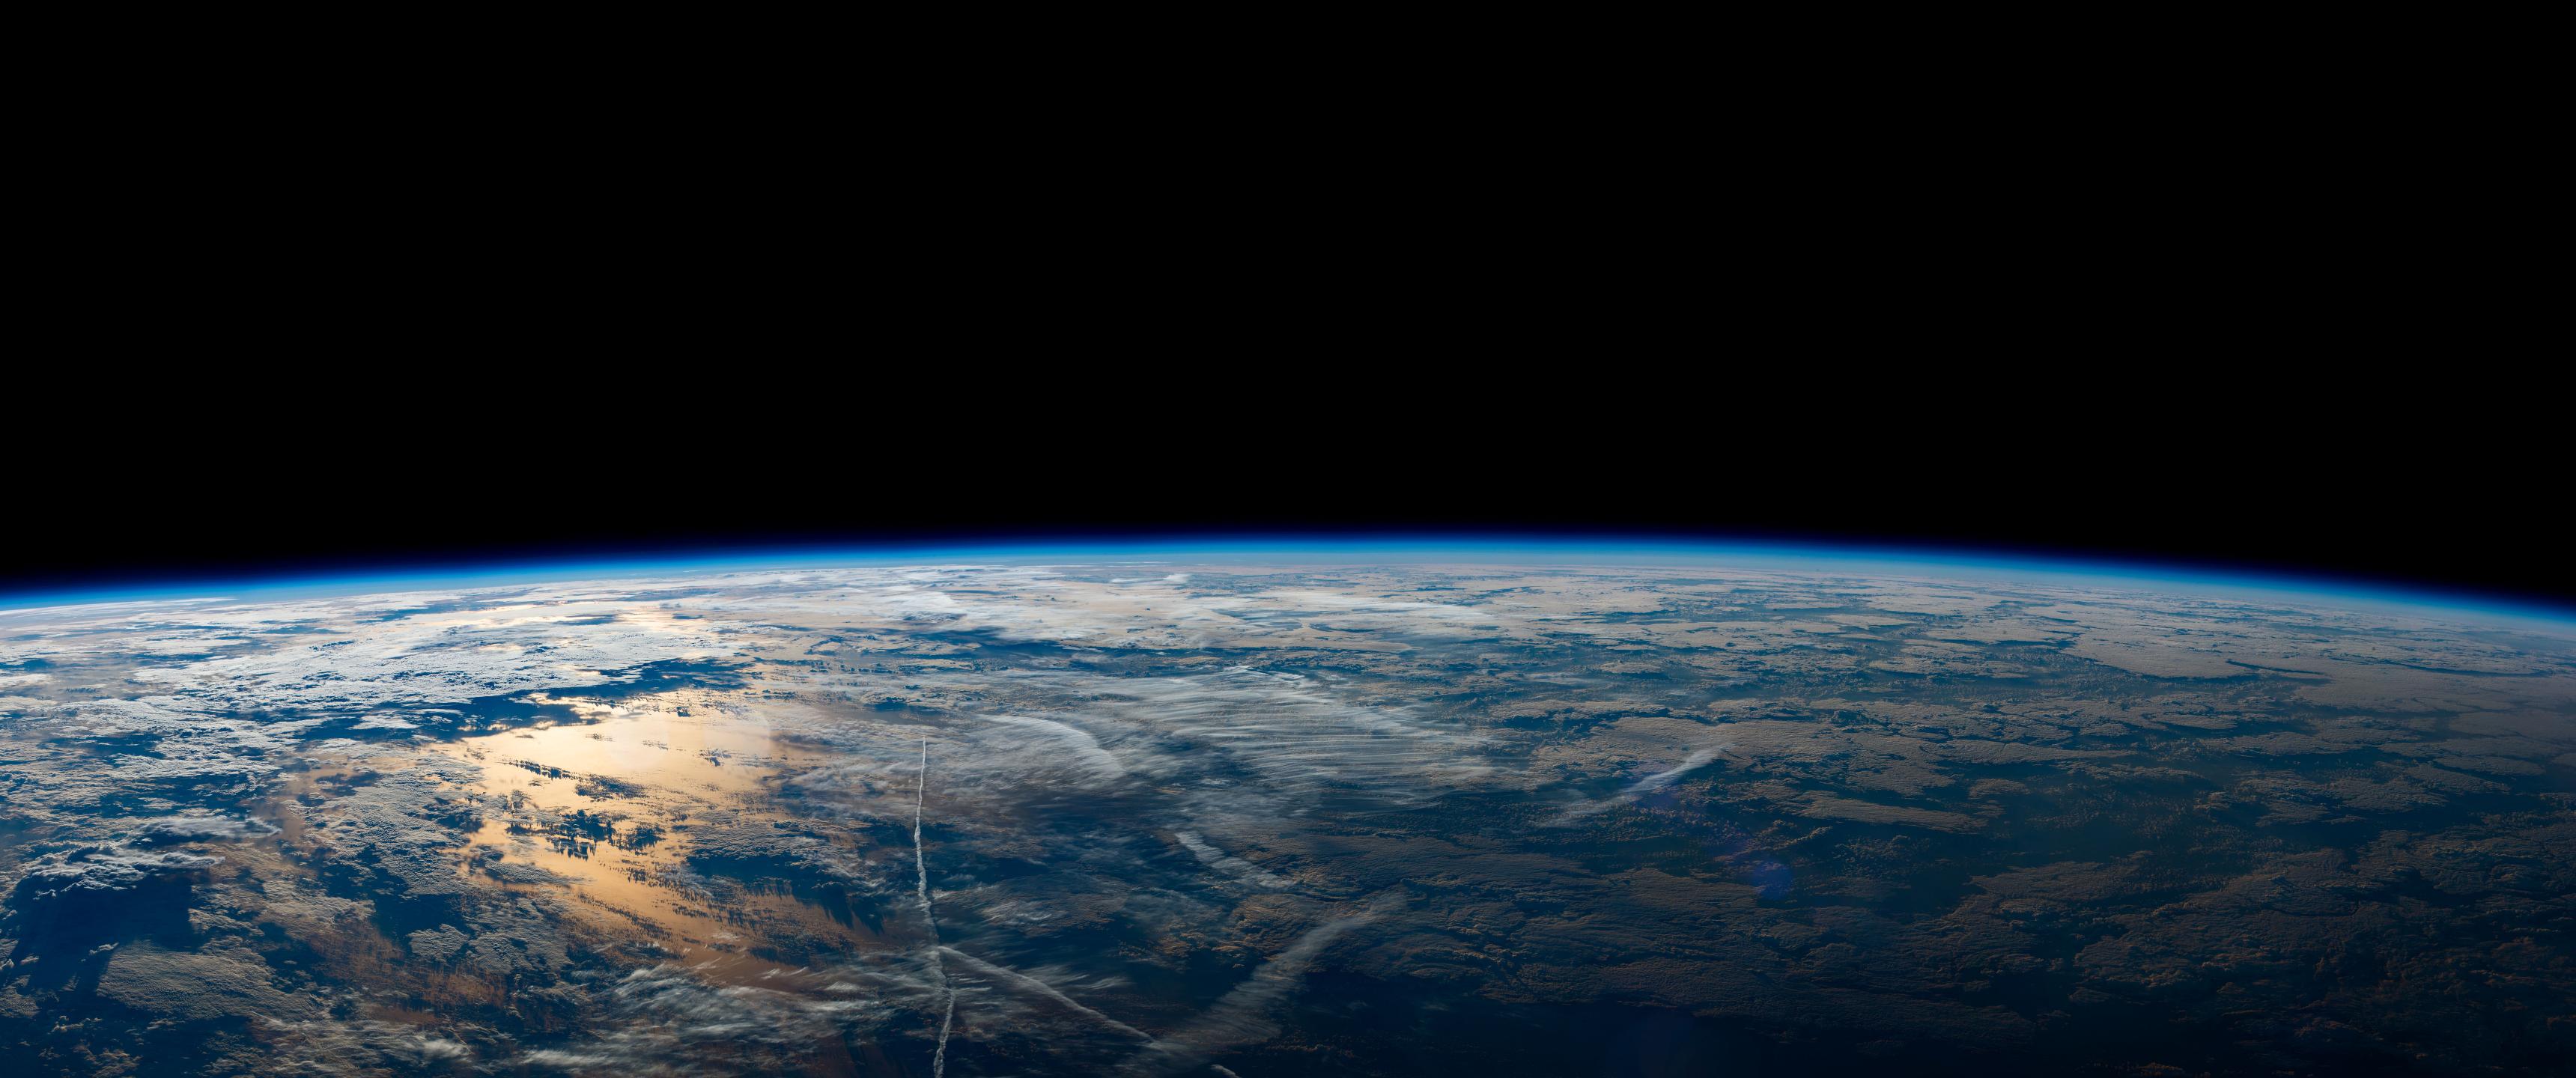 Earth From Space 3440x1440